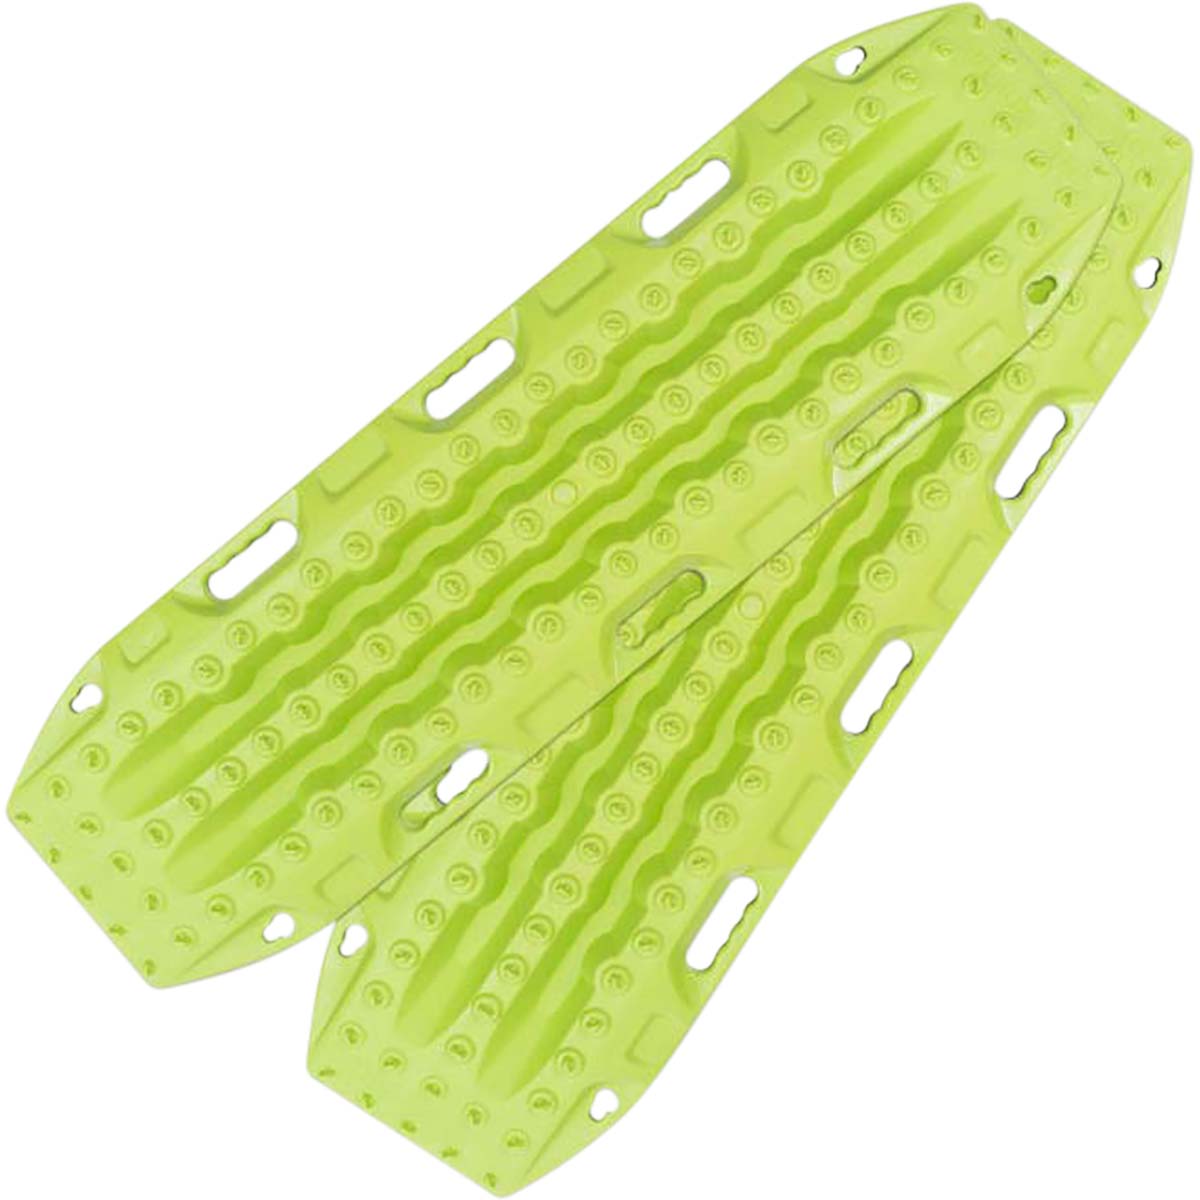 Maxtrax MKII Recovery Boards Lime Green